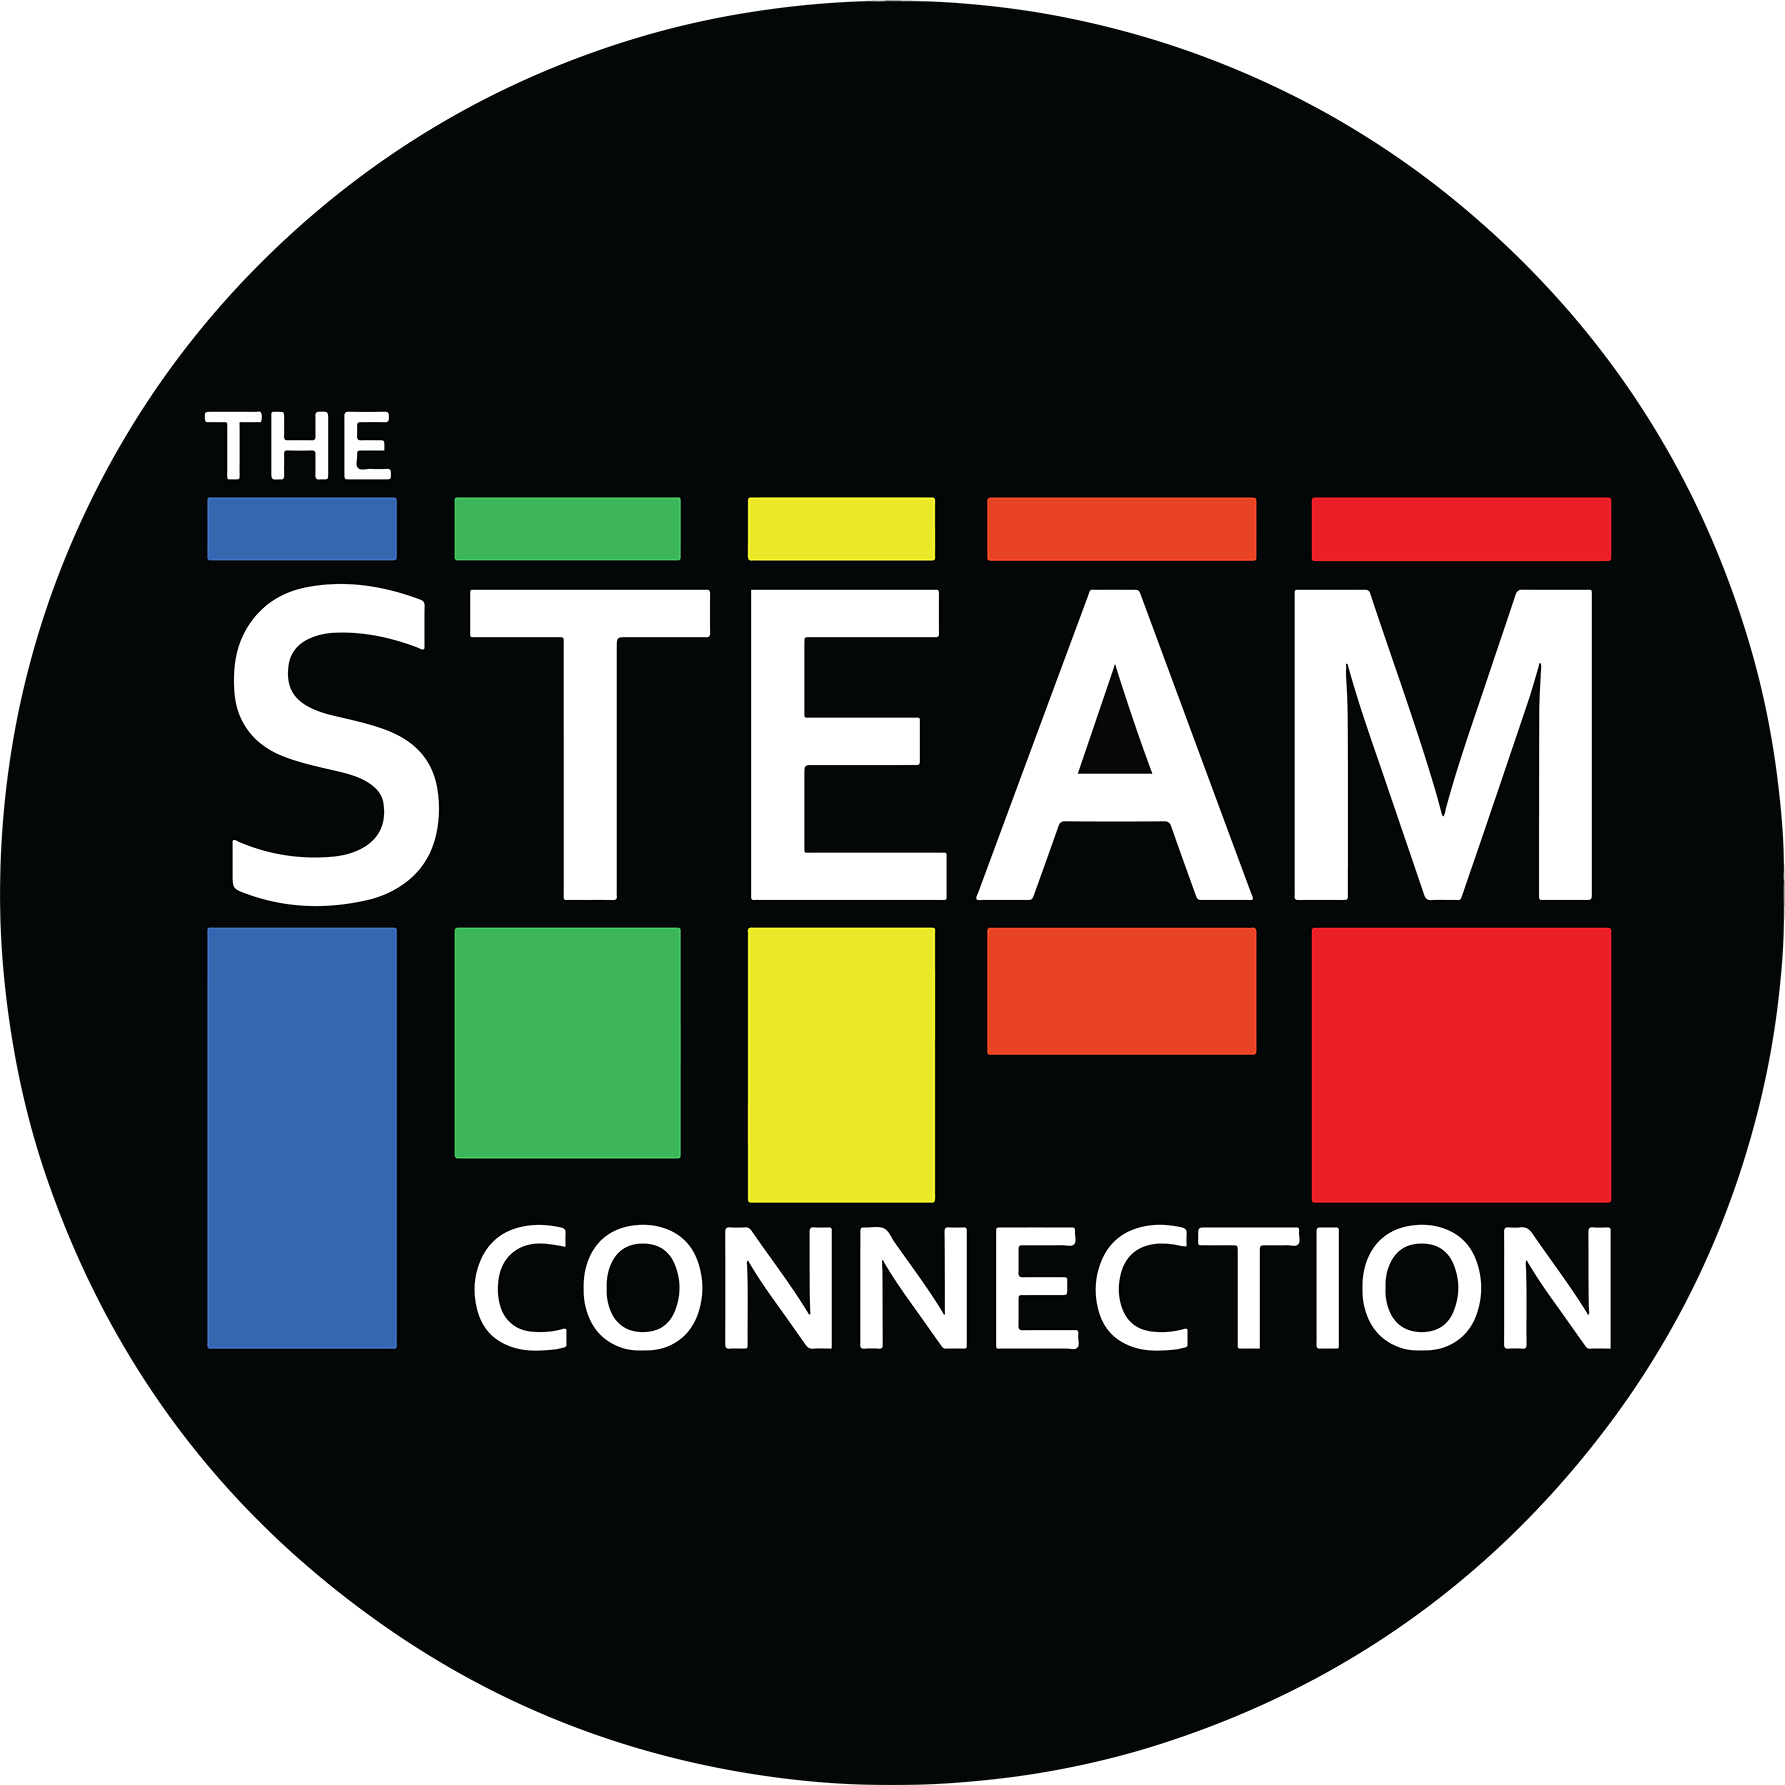 The STEAM Connection